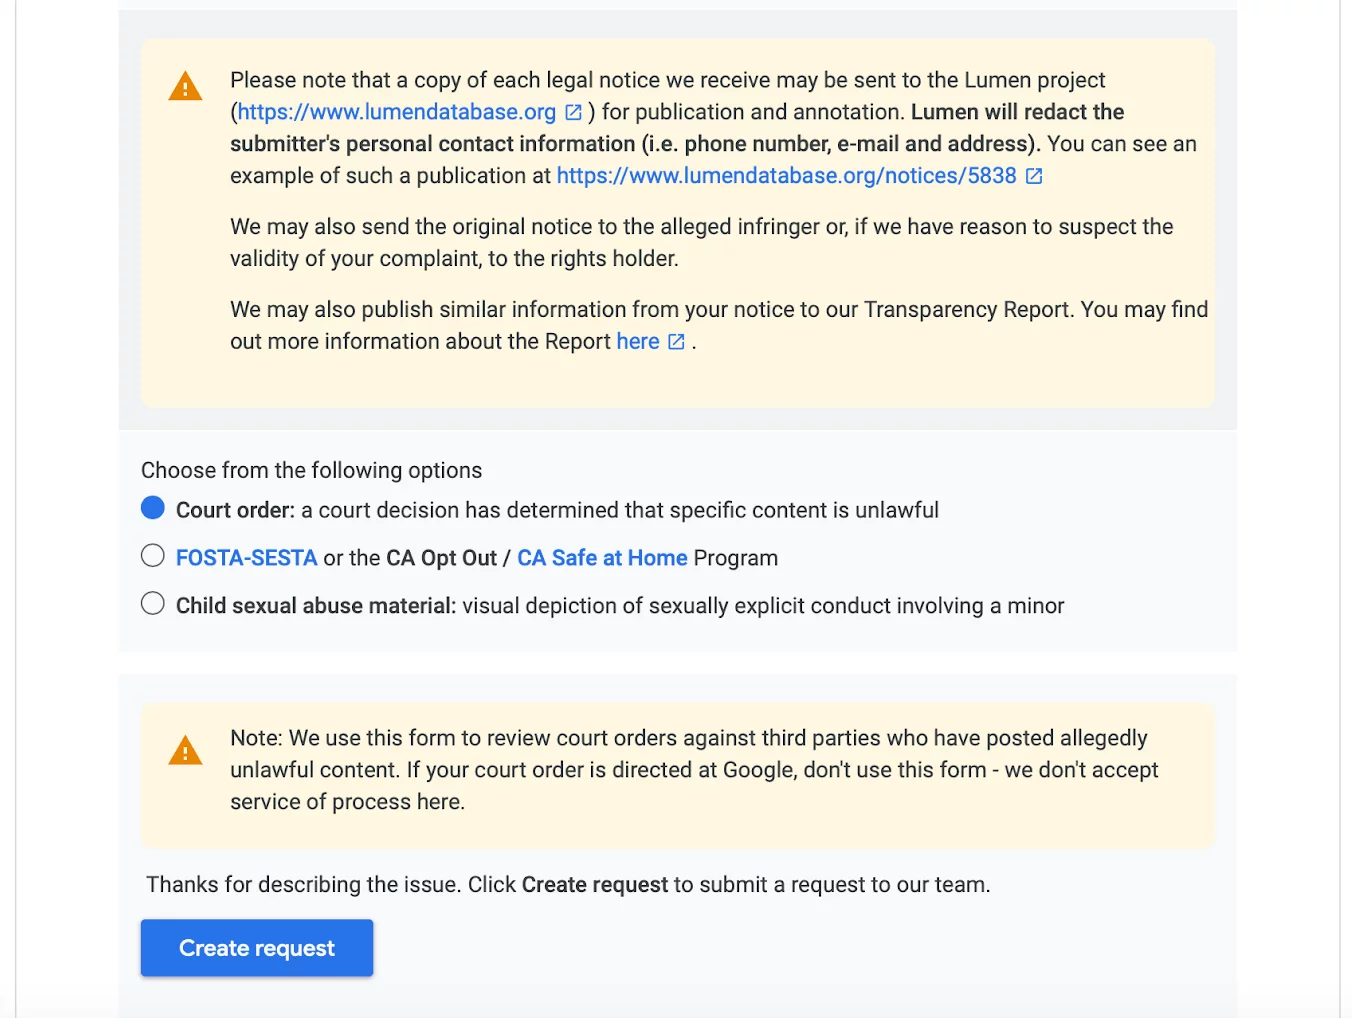 Removing content from Google: Other Legal Issue